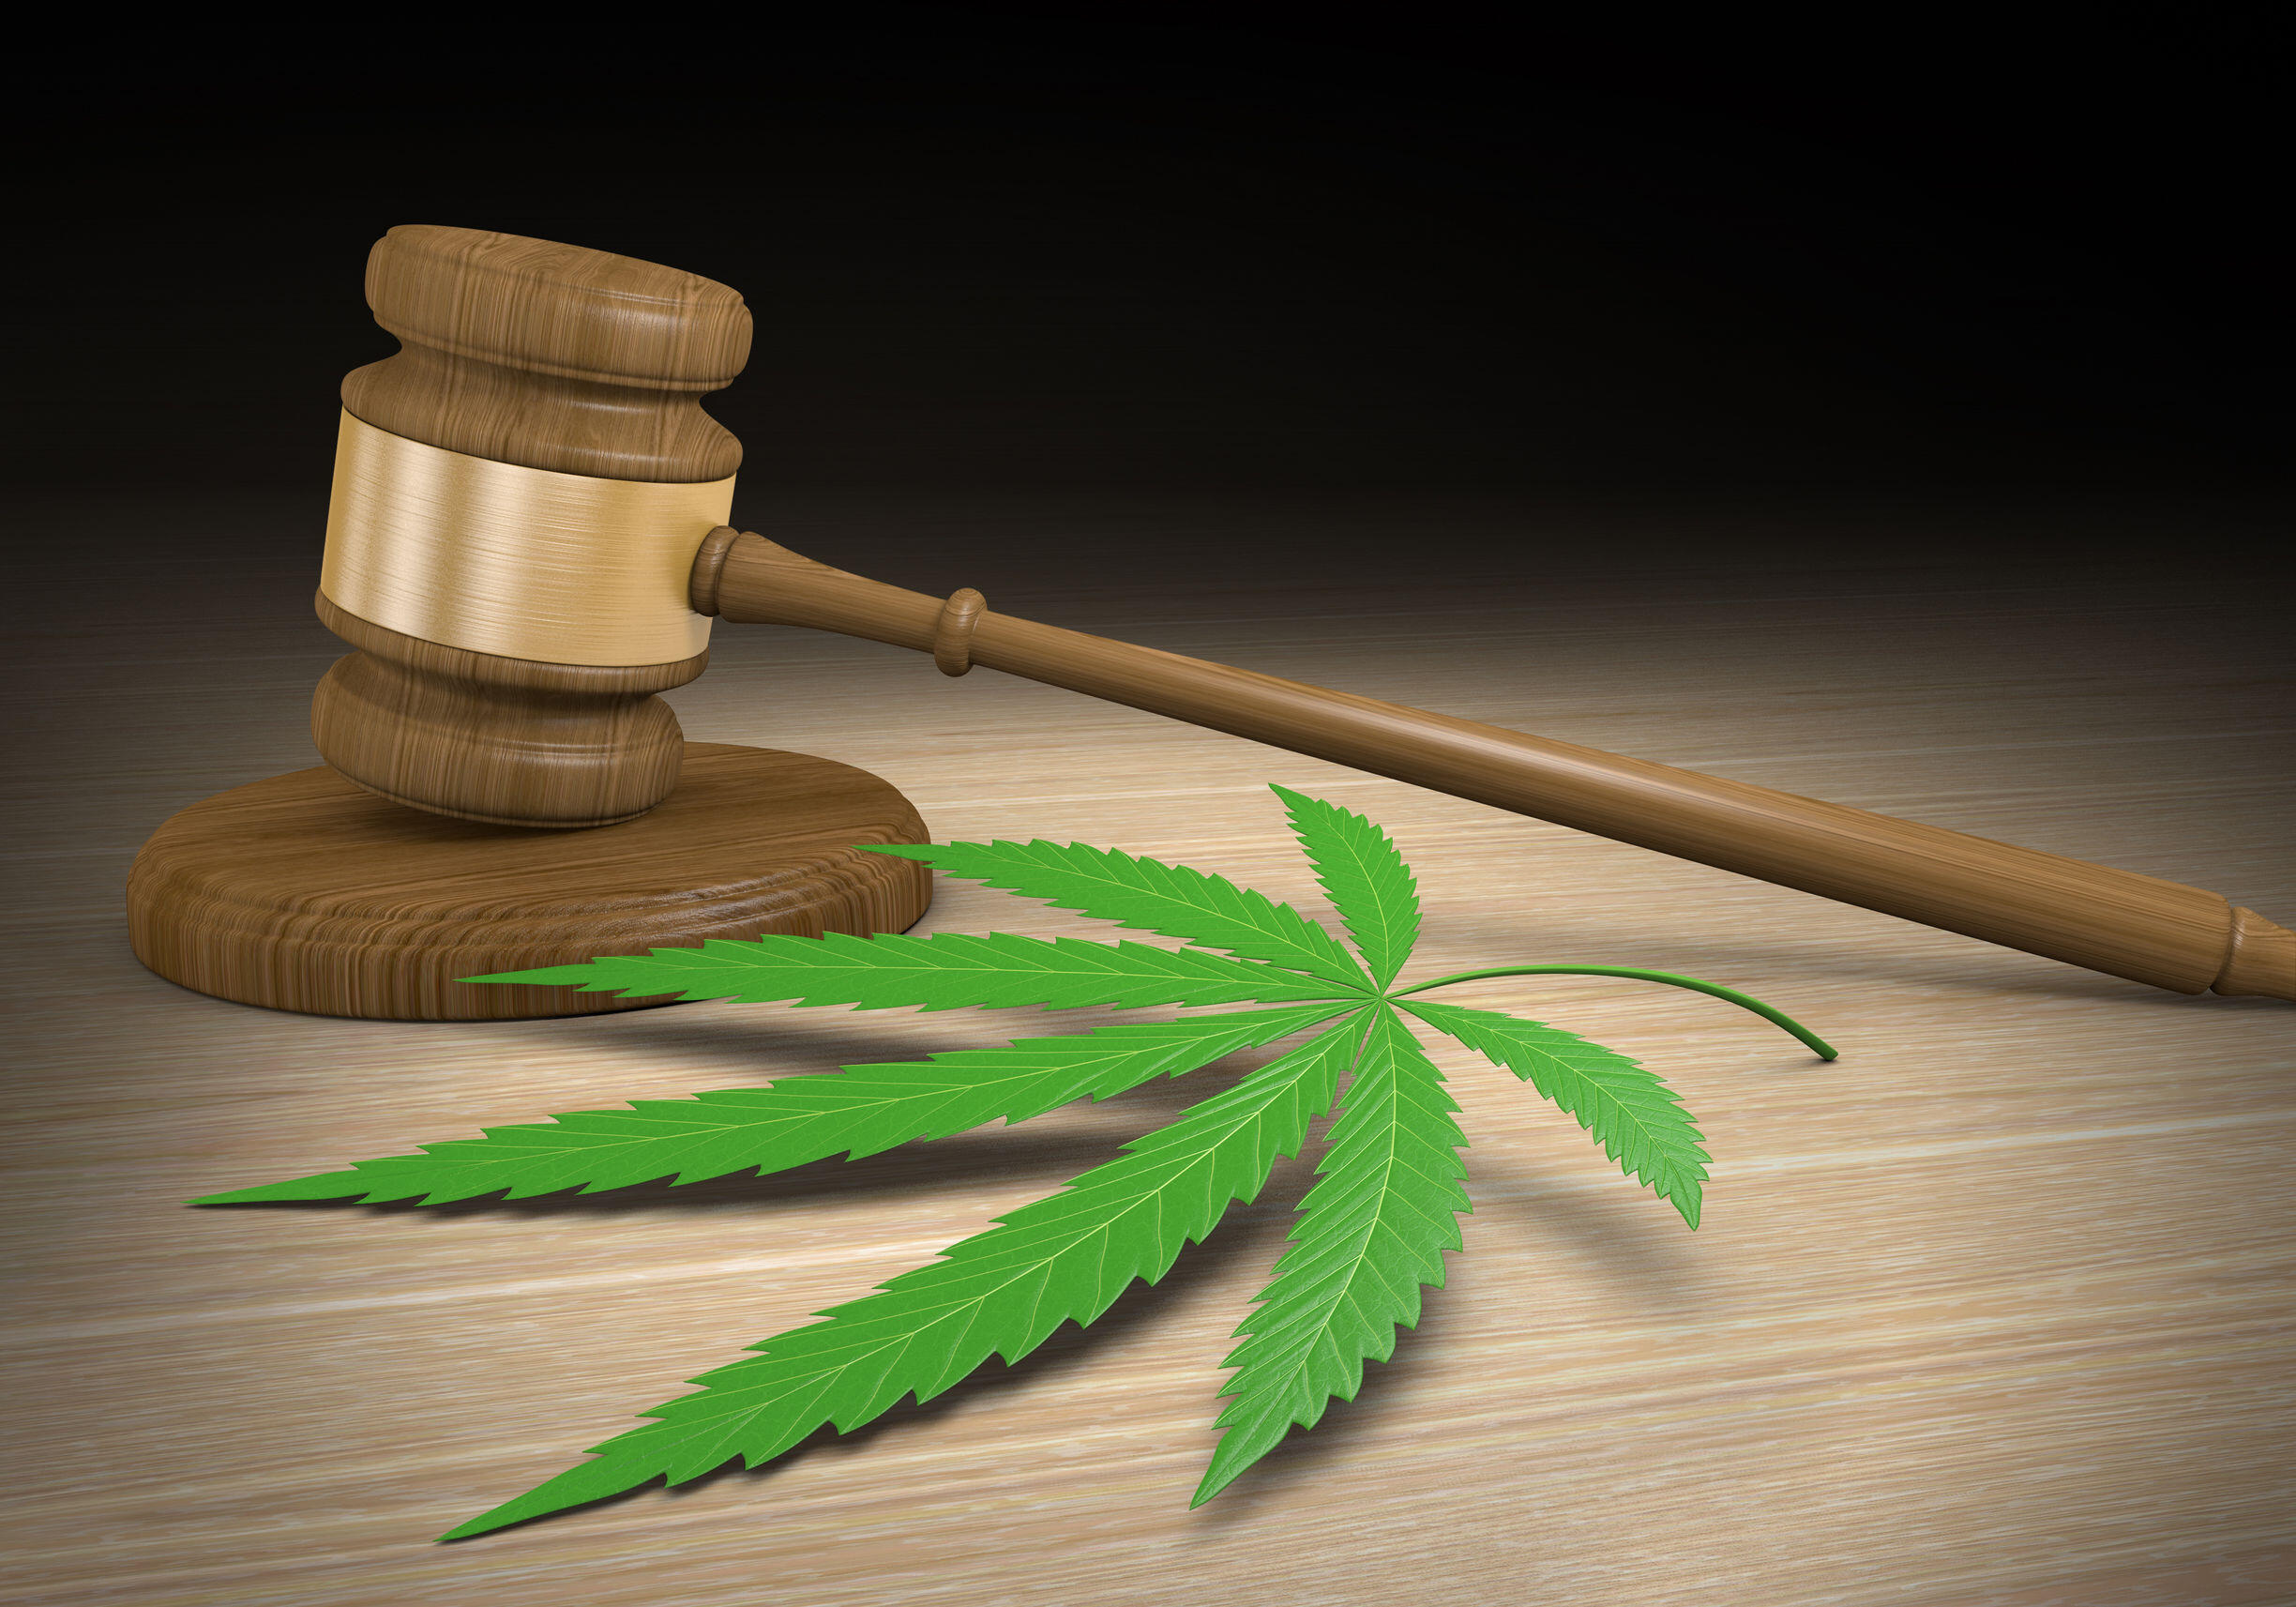 Medible review californias largest cannabis business landlord sues city over regulations